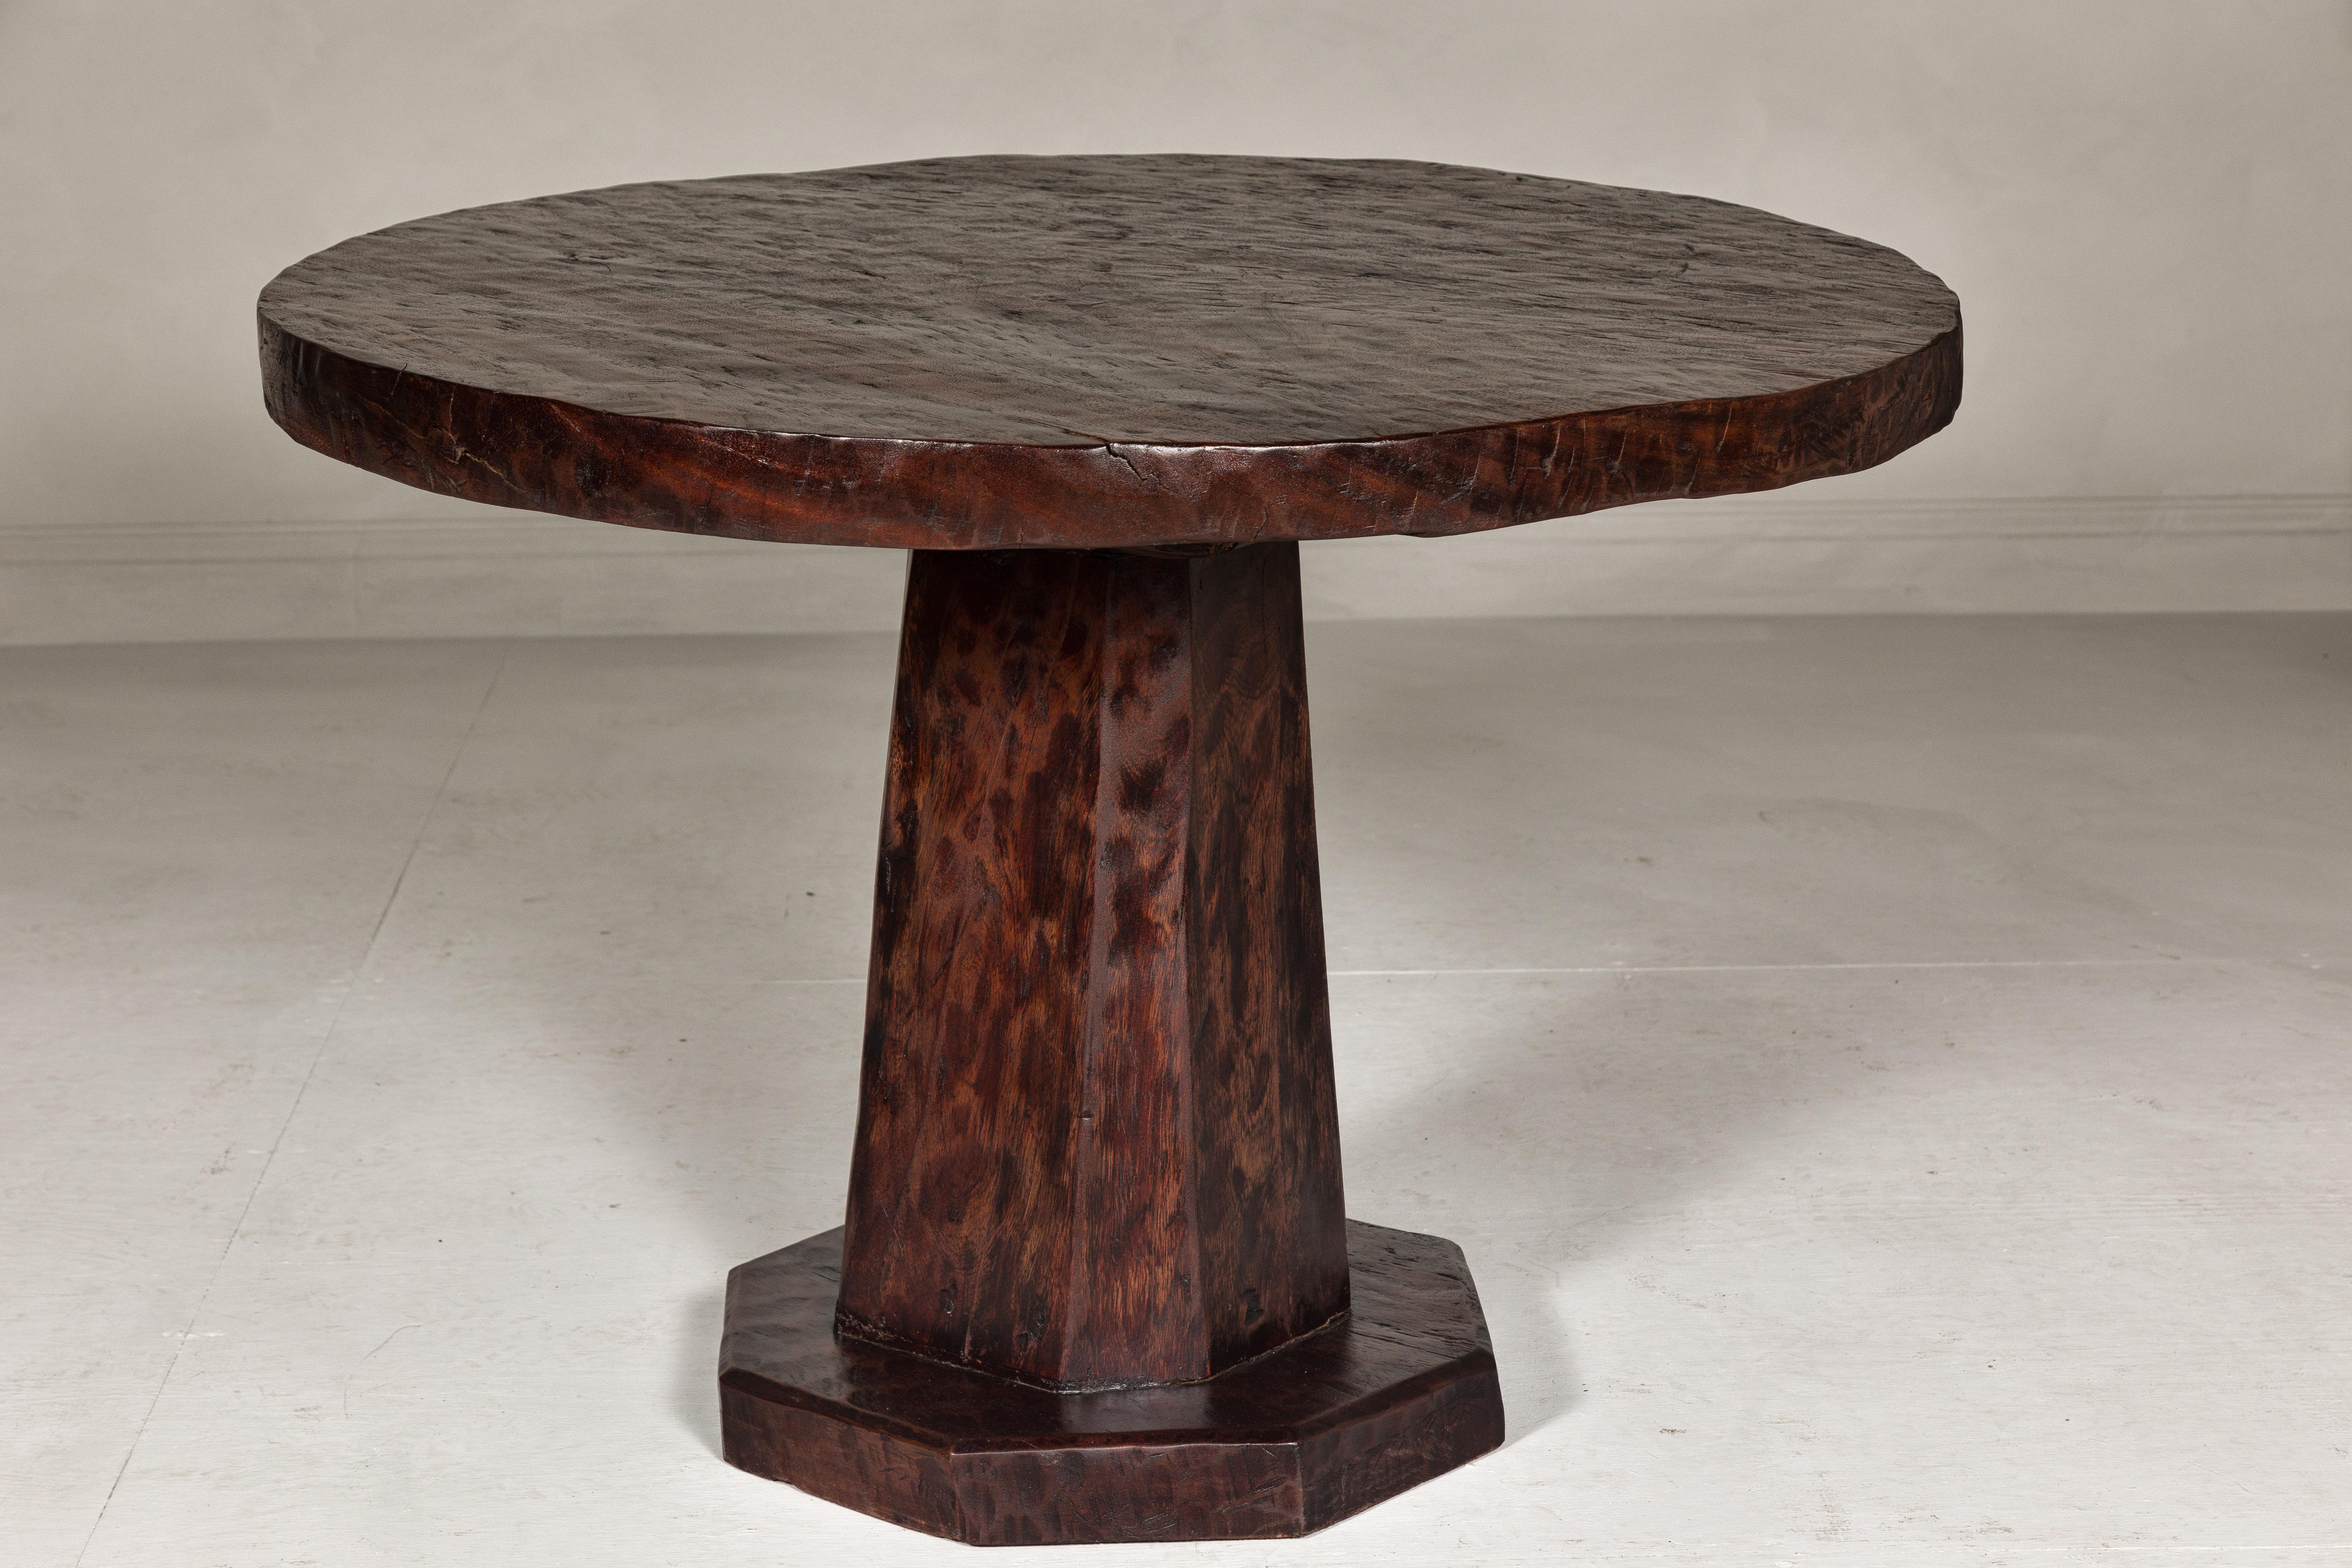 Teak Wood Round Top Center Pedestal Table with Dark Stain, Vintage In Good Condition For Sale In Yonkers, NY